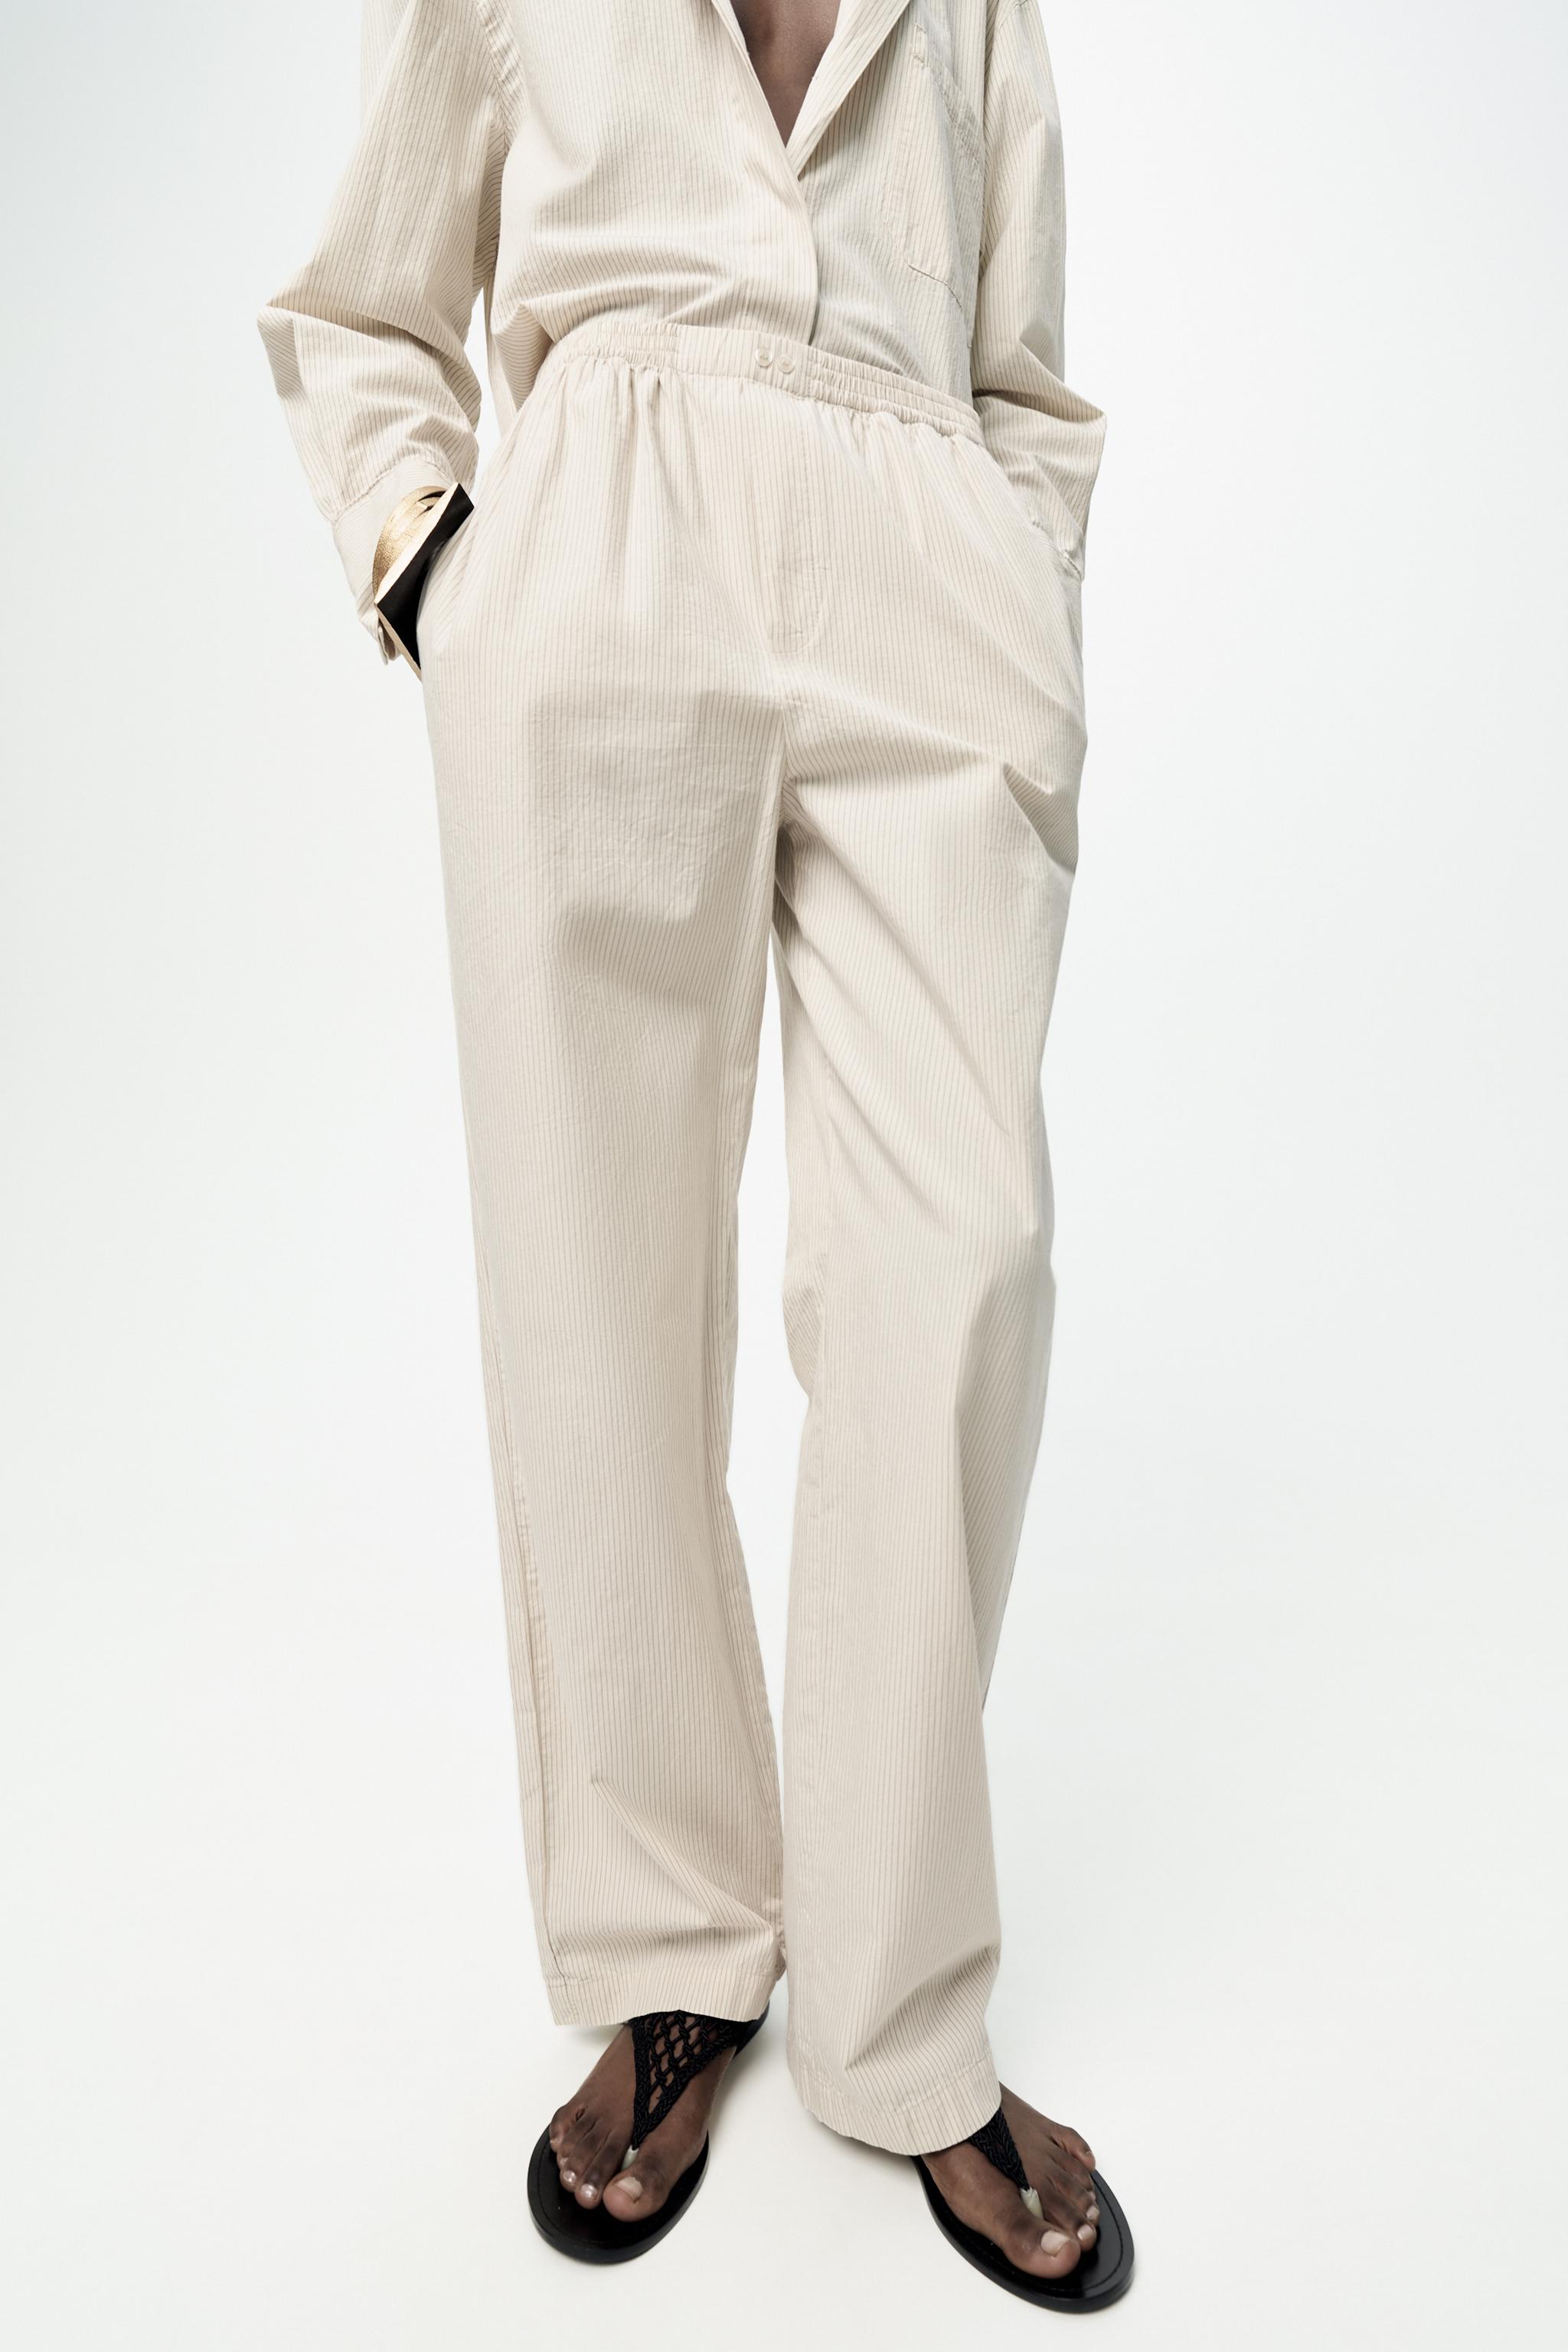 ZARA WOMAN NWT SS23 OYSTER WHITE WIDE LEG PANTS WITH DARTS ALL SIZES  8372/124